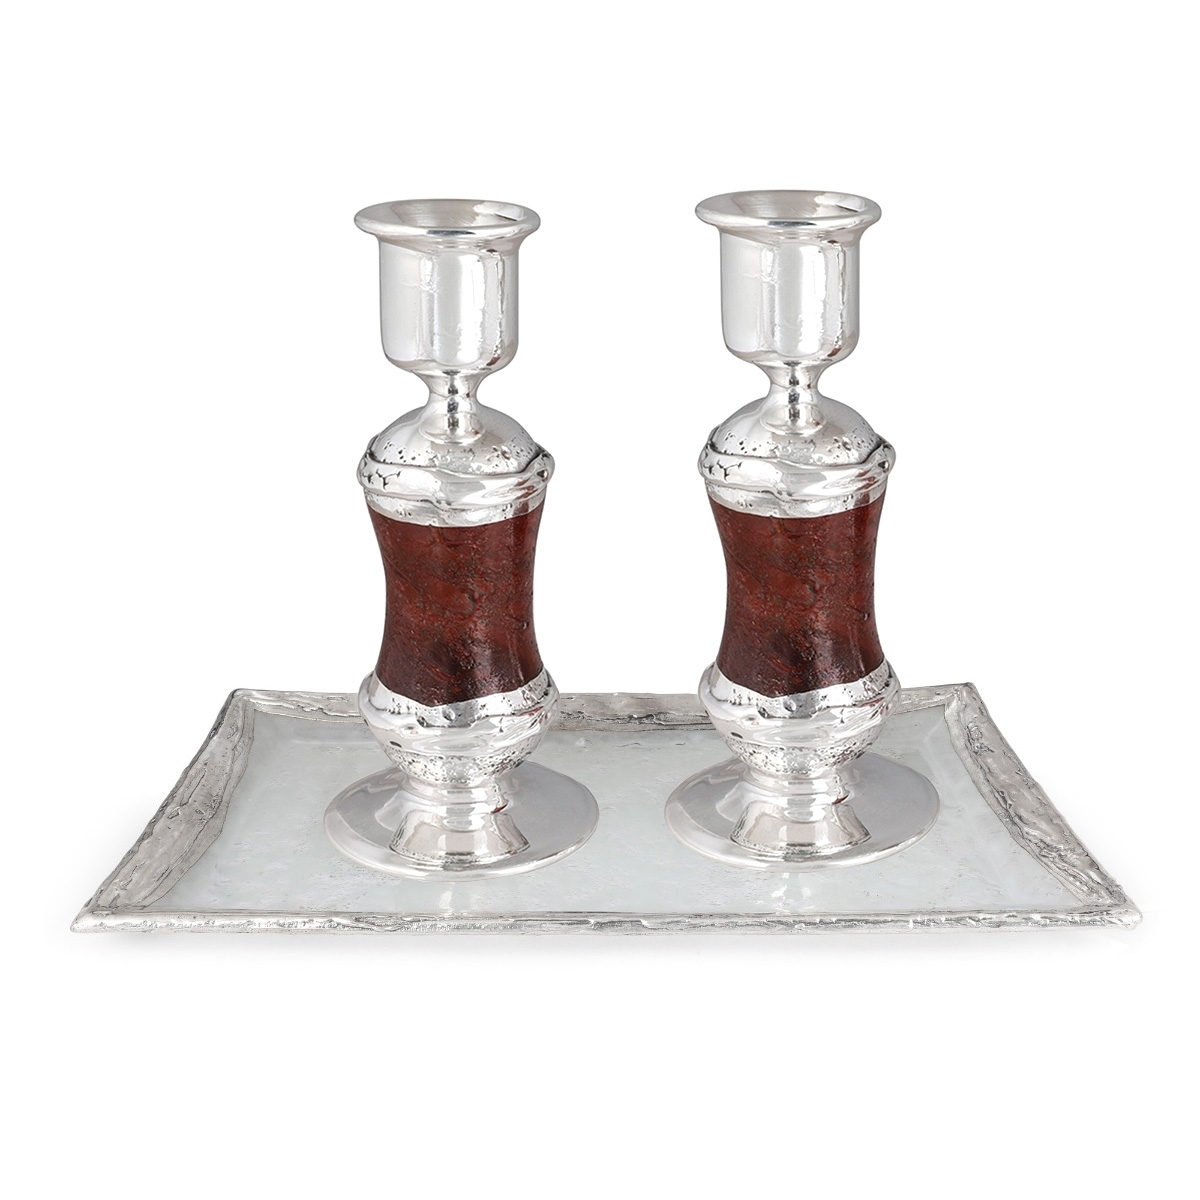 Quaint Handcrafted Red Glass & Sterling Silver Plated Sabbath Candlesticks - 1